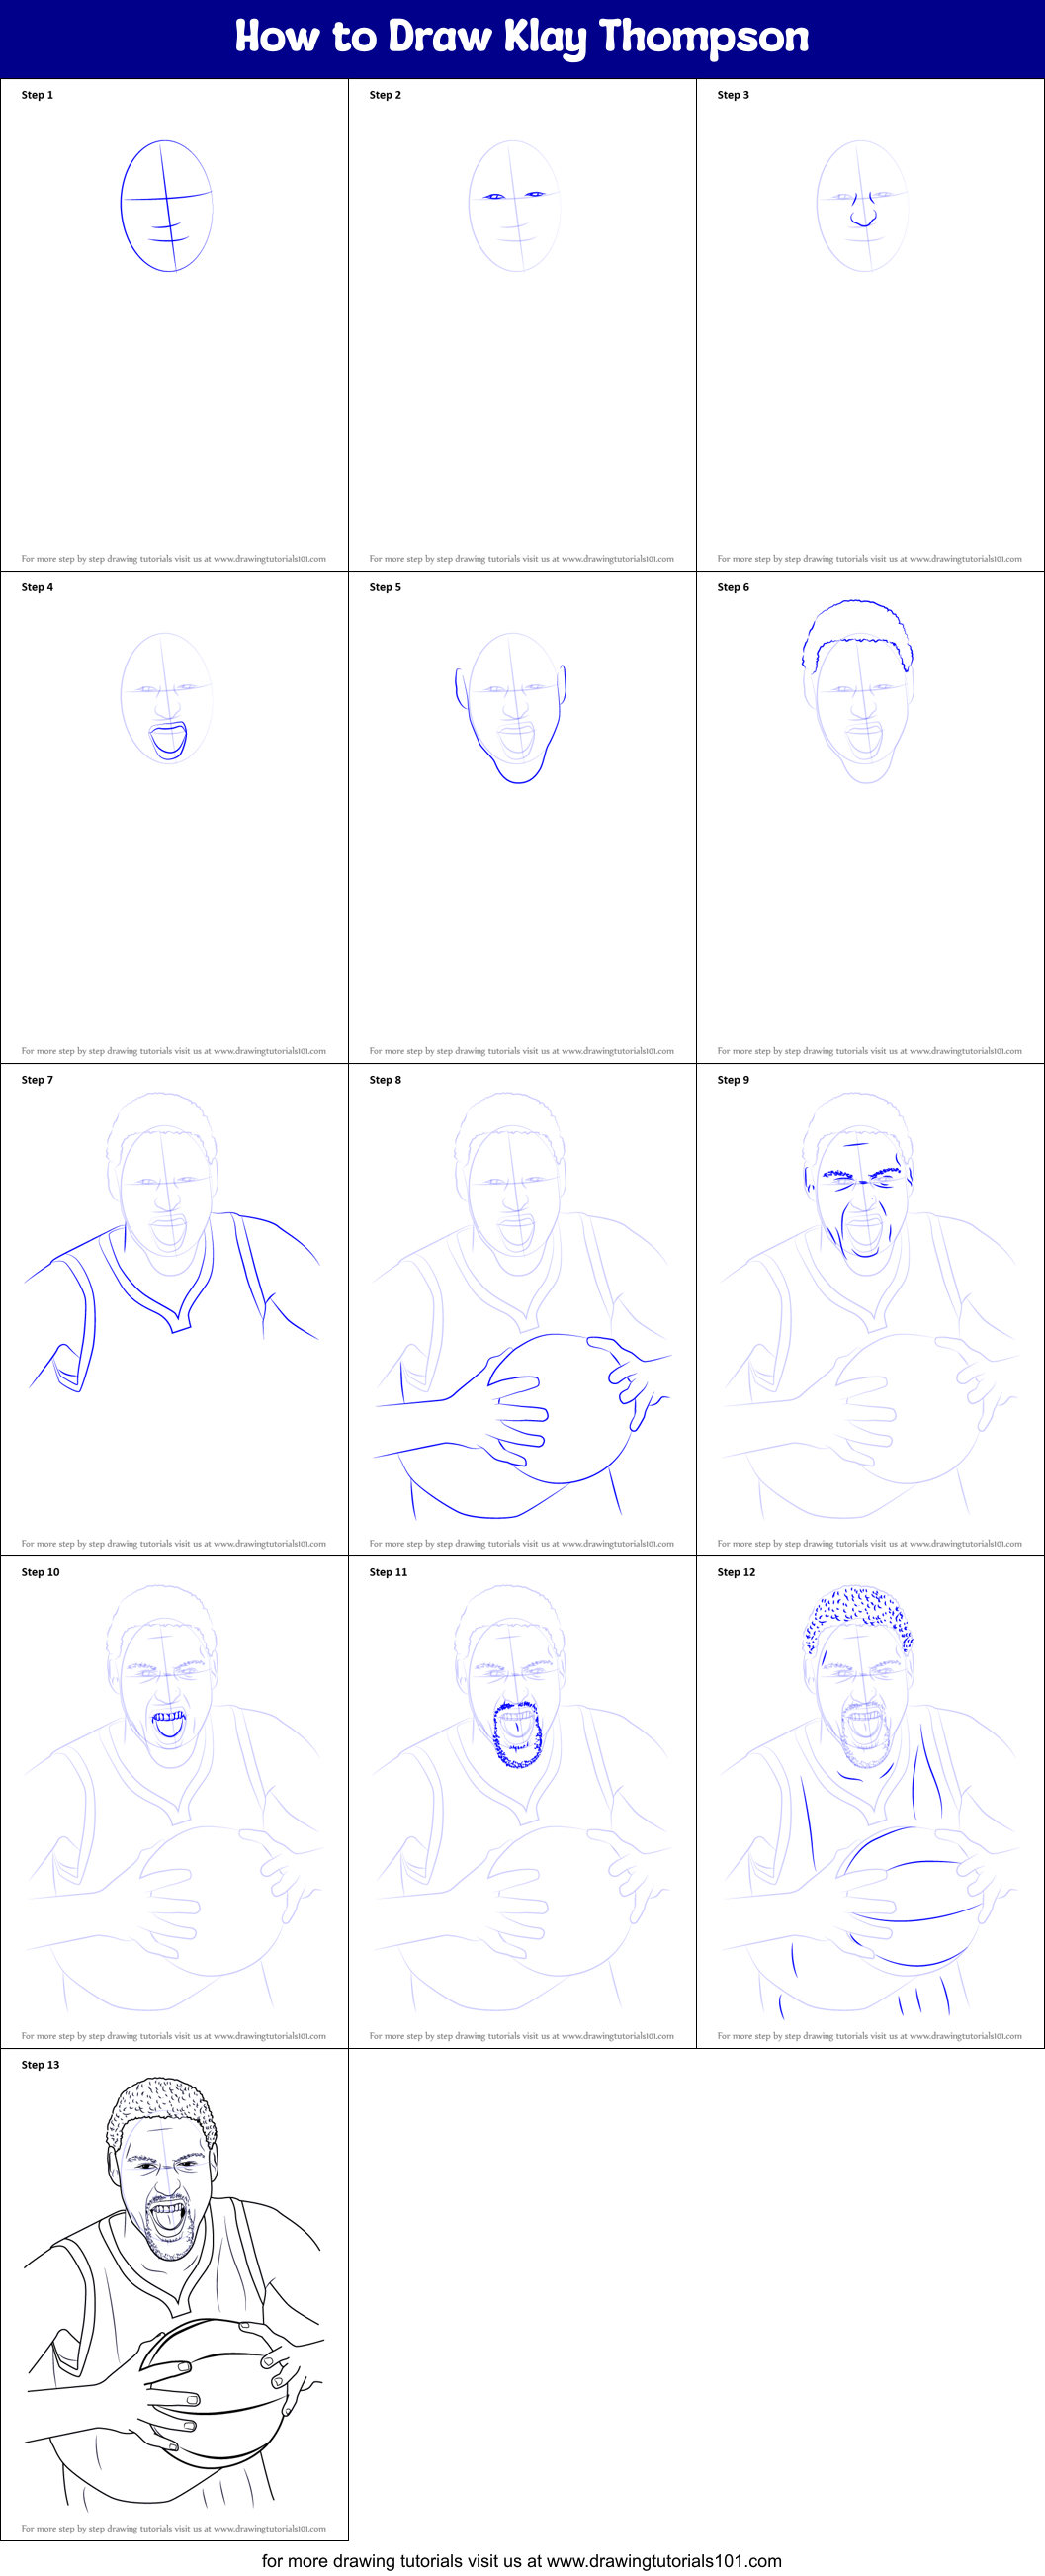 How to Draw Klay Thompson printable step by step drawing sheet